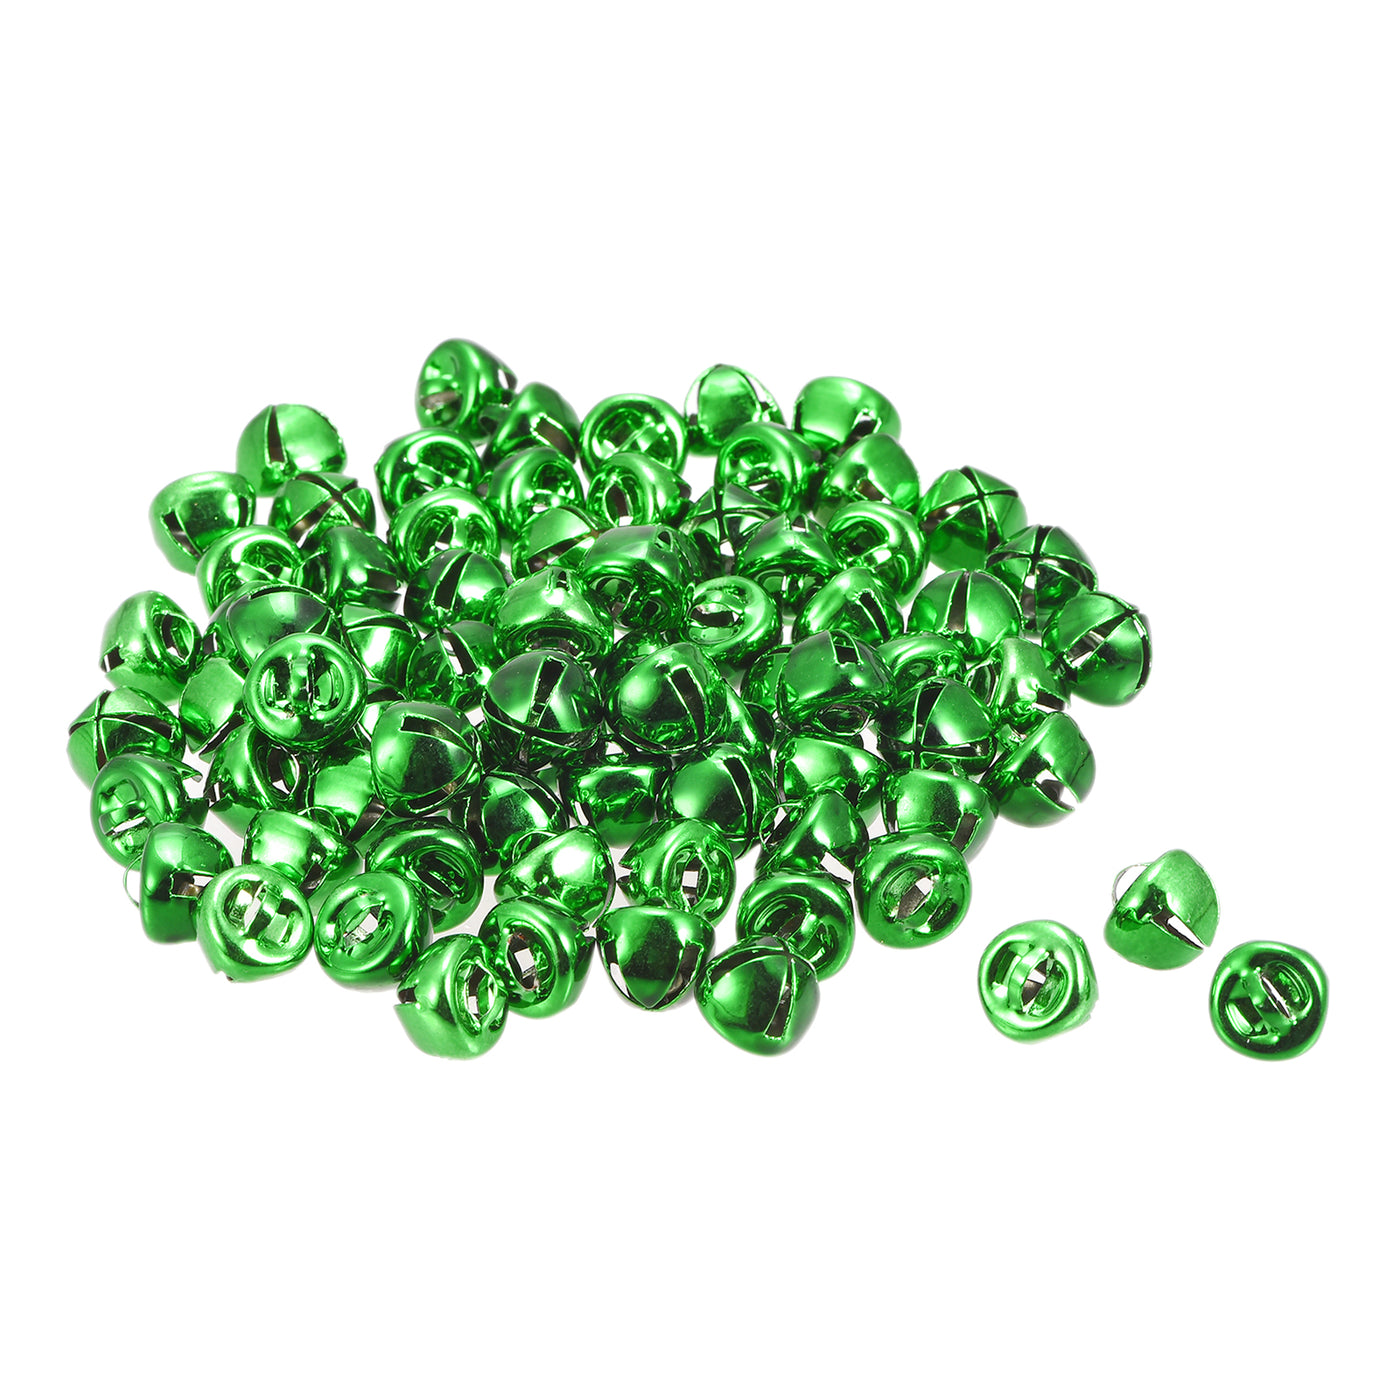 uxcell Uxcell Jingle Bells, 10mm 120pcs Small Bells for Crafts DIY Christmas, Green